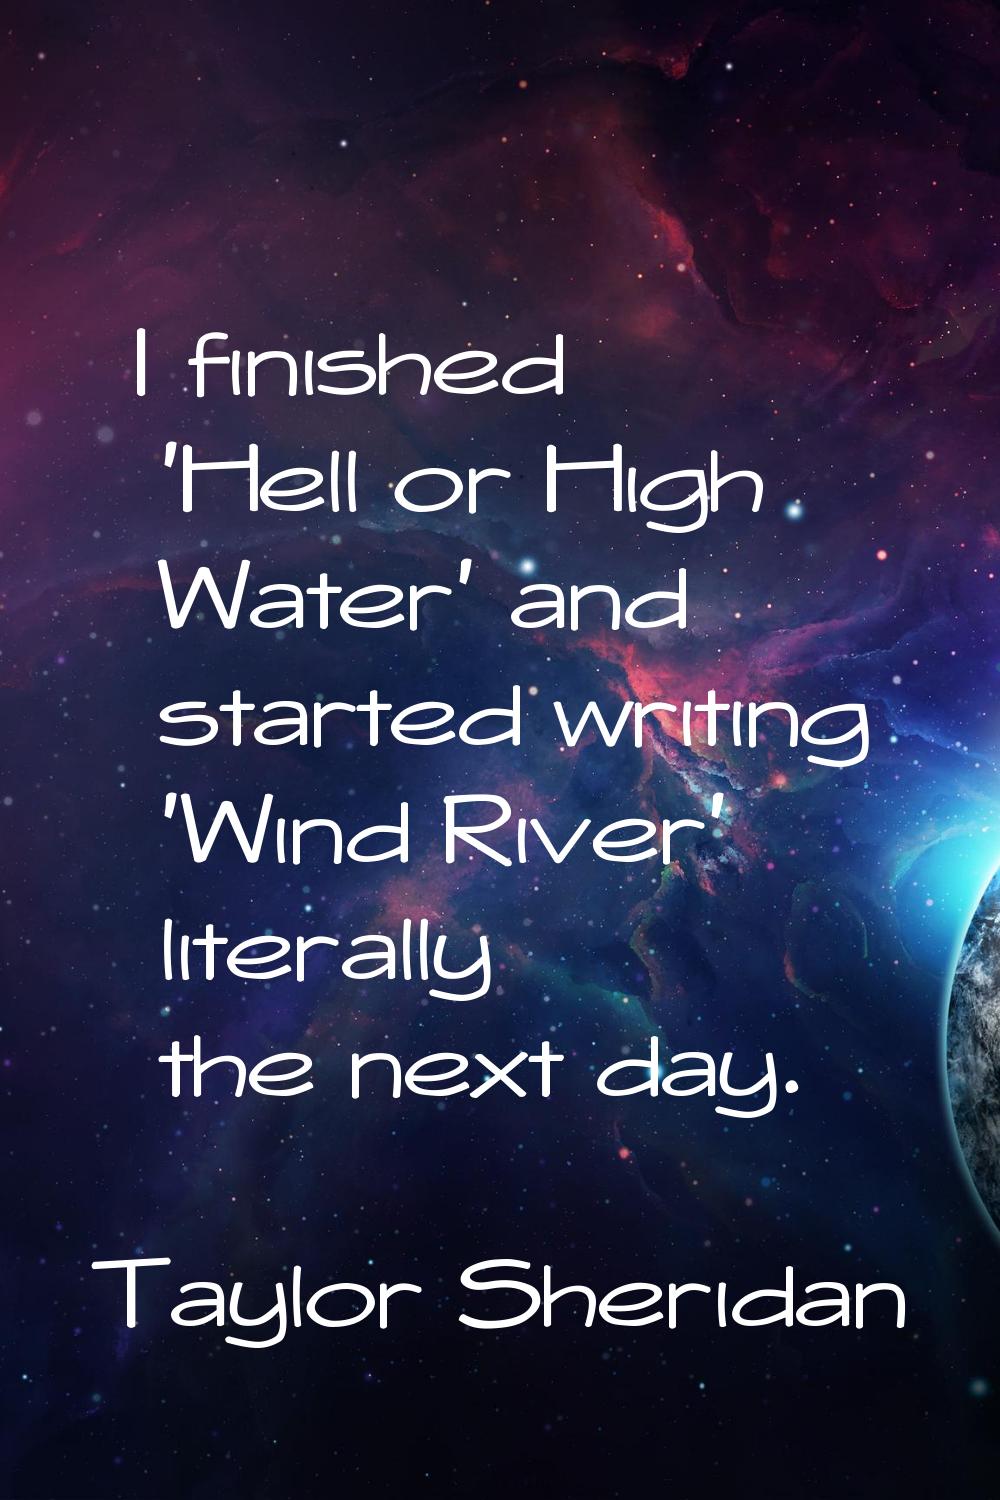 I finished 'Hell or High Water' and started writing 'Wind River' literally the next day.